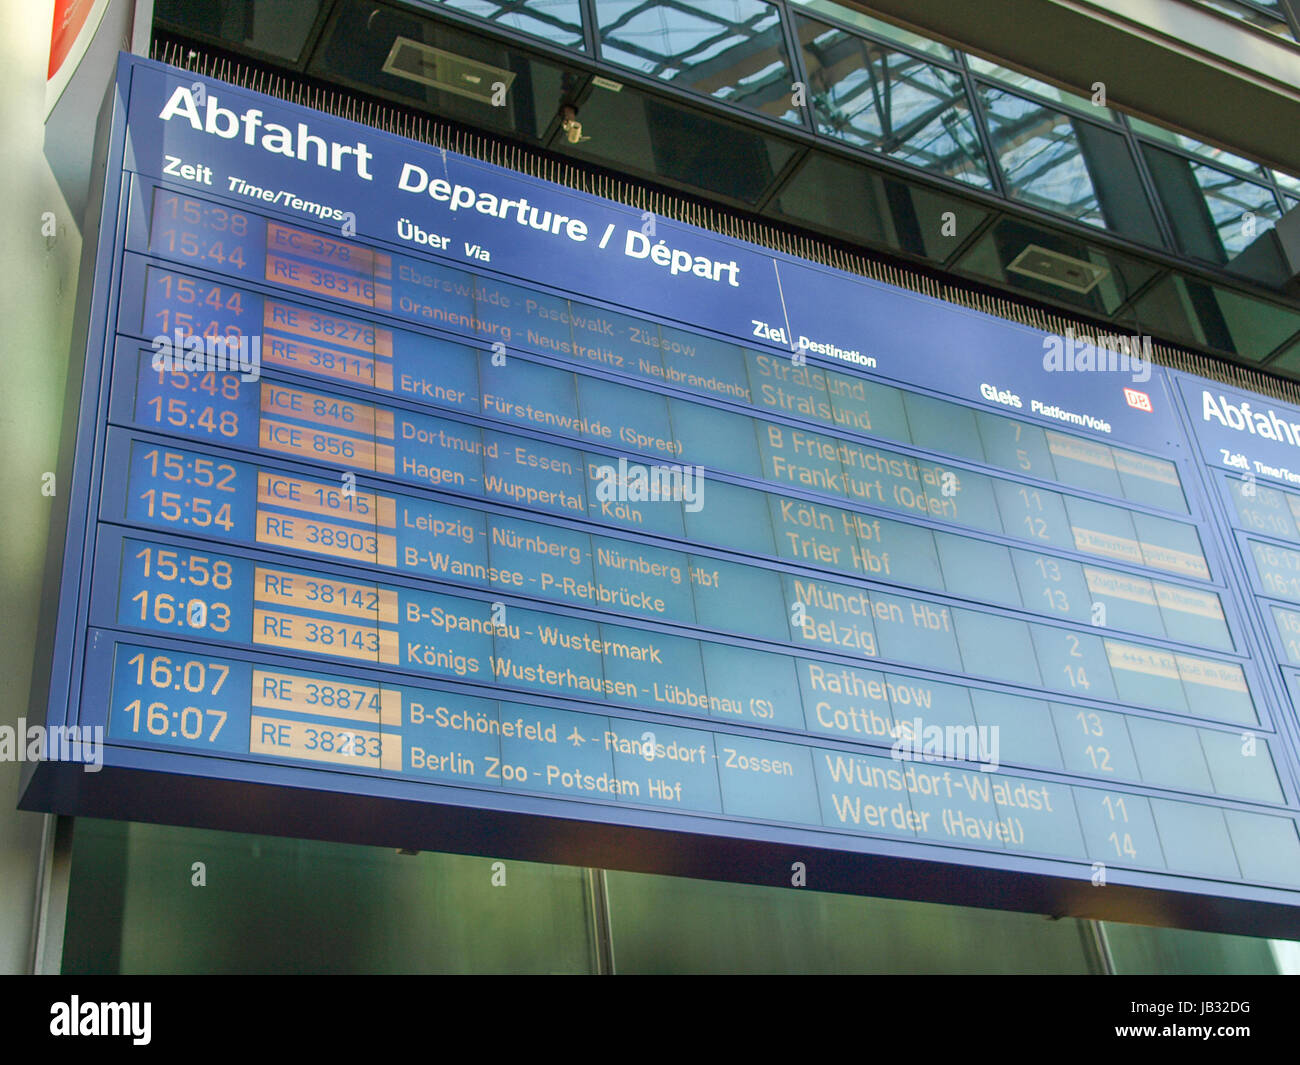 BERLIN, GERMANY - APRIL 25, 2010: Train departures timetable Berliner Hauptbahnhof (Central station) showing trains for Frankfurt, Koeln, Muenchen and other destinations Stock Photo -